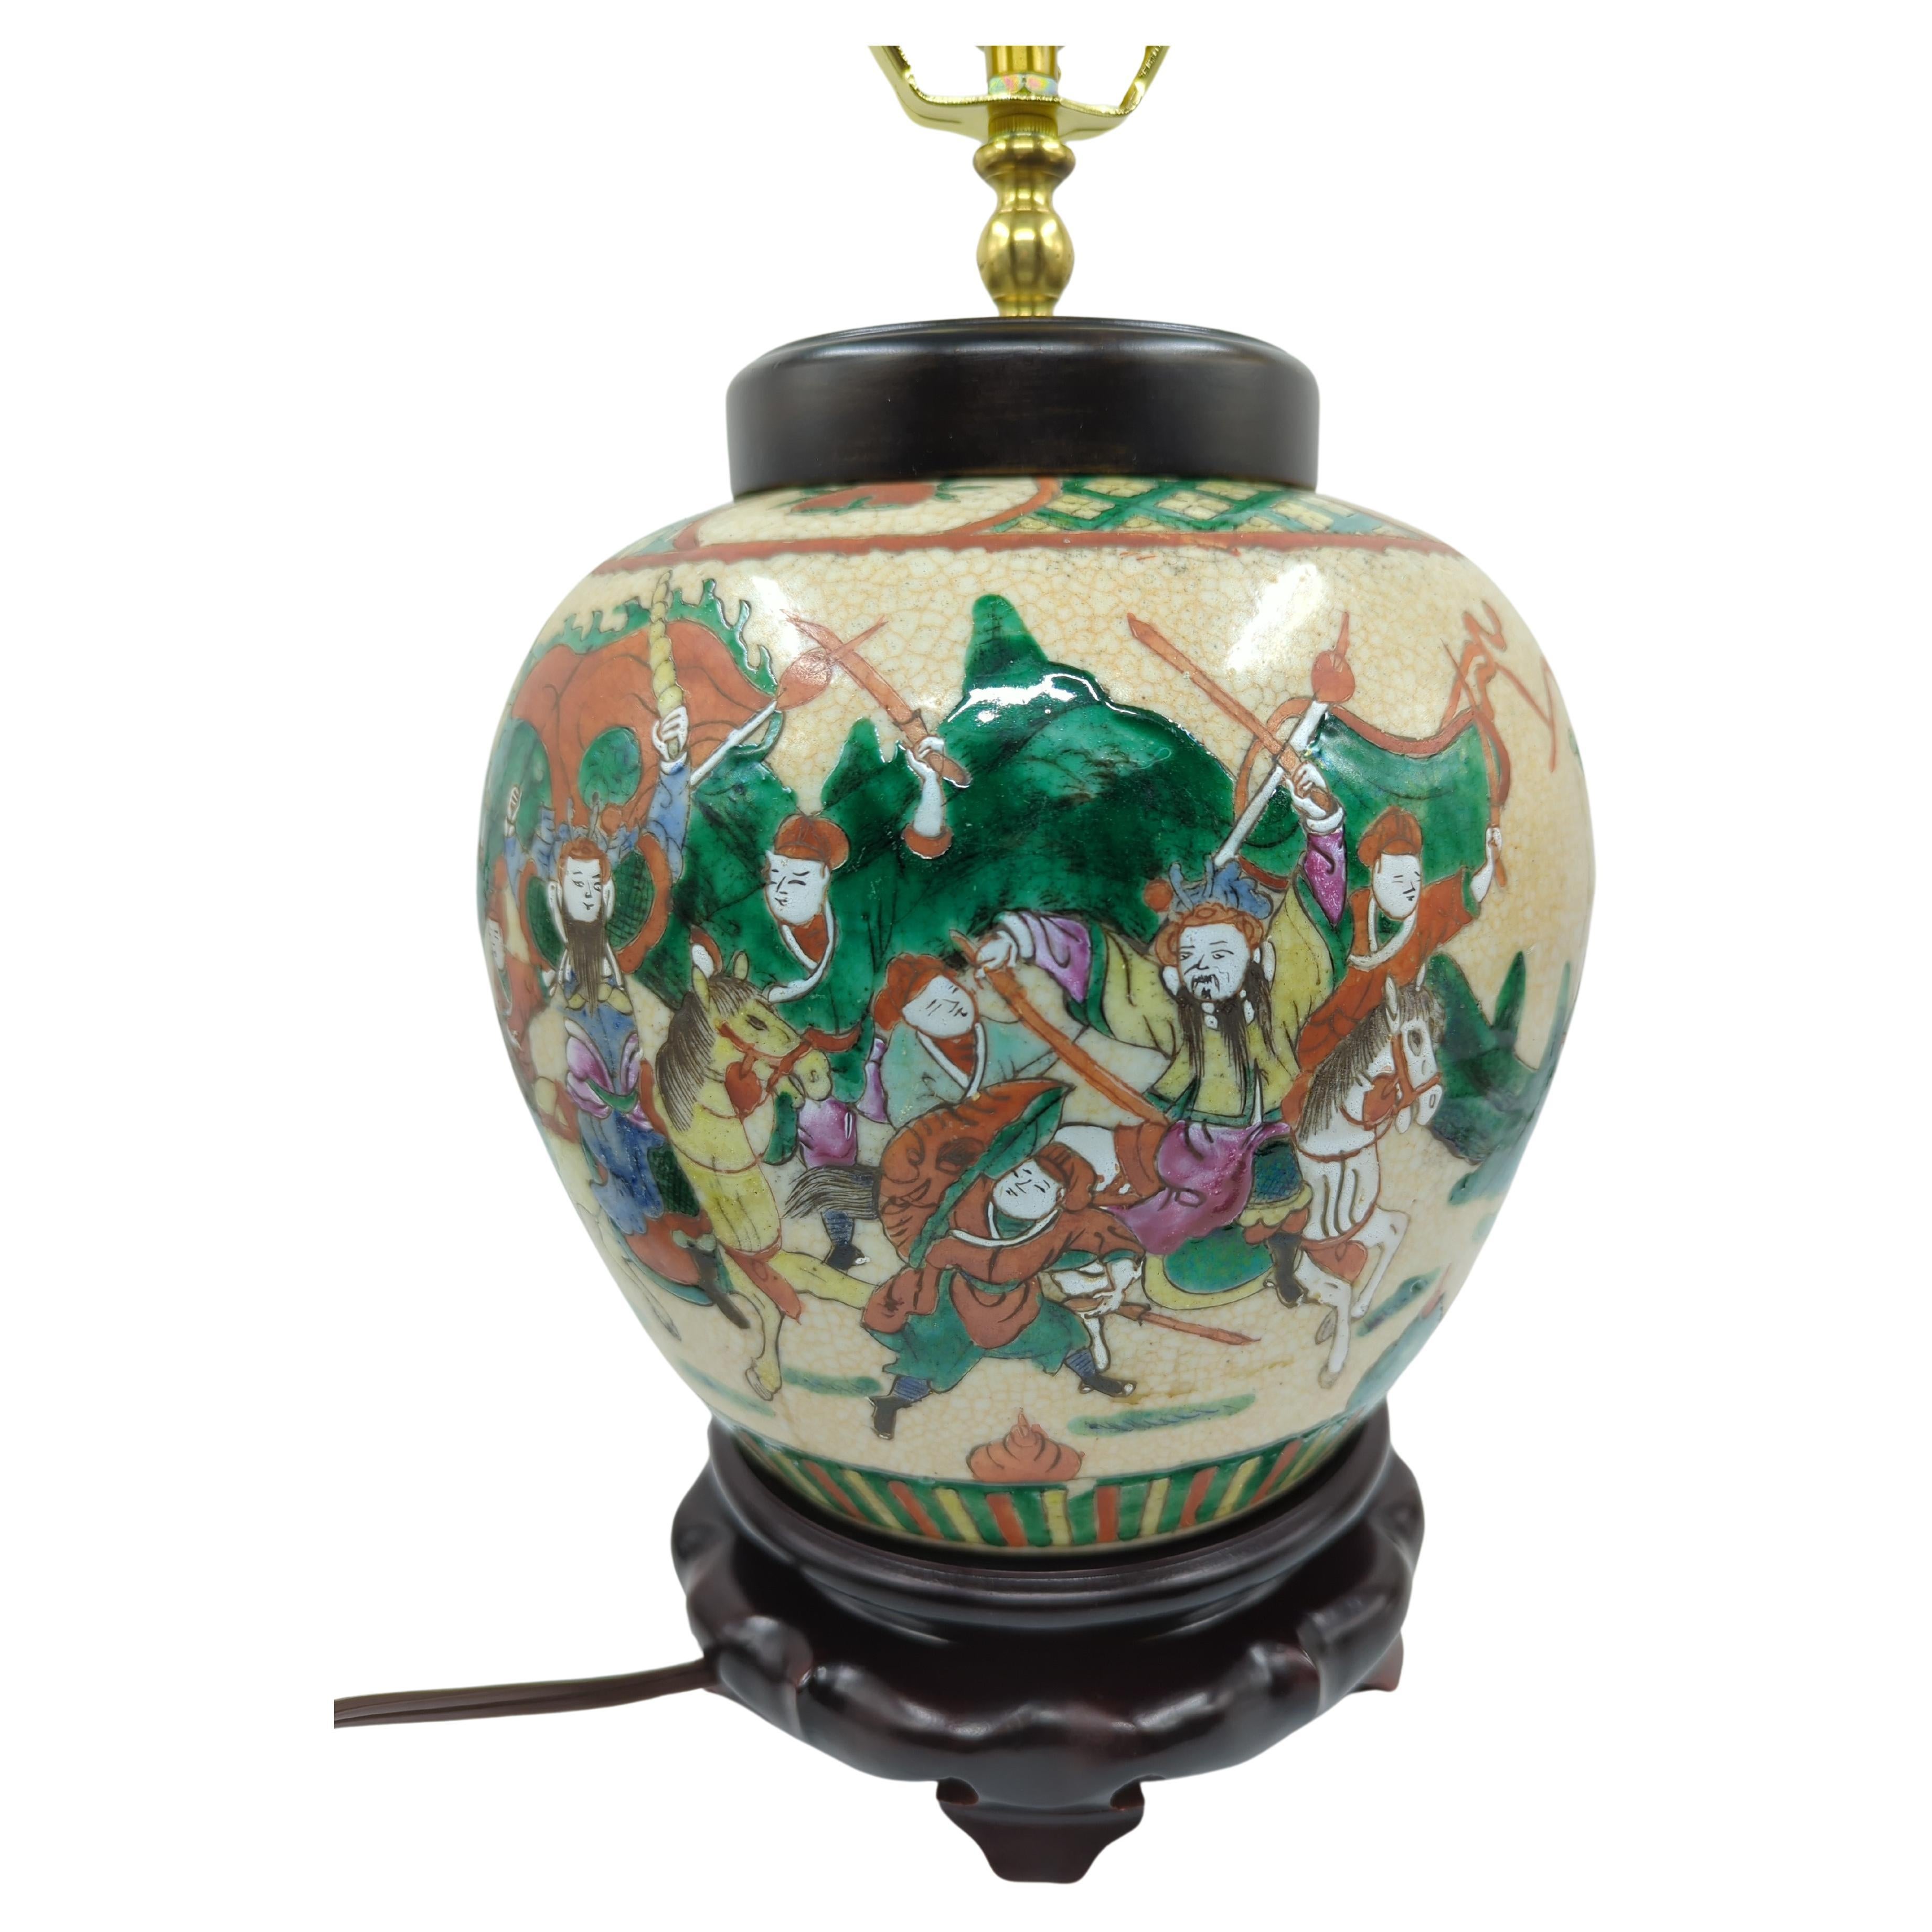 A vintage Chinese porcelain ovoid jar vase with Nanking style crackle glaze and decorated in famille rose with warrior figures in a battle scene, electrified and turned into a lamp on wooden stan

E26 socket
Overall size:  H: 17